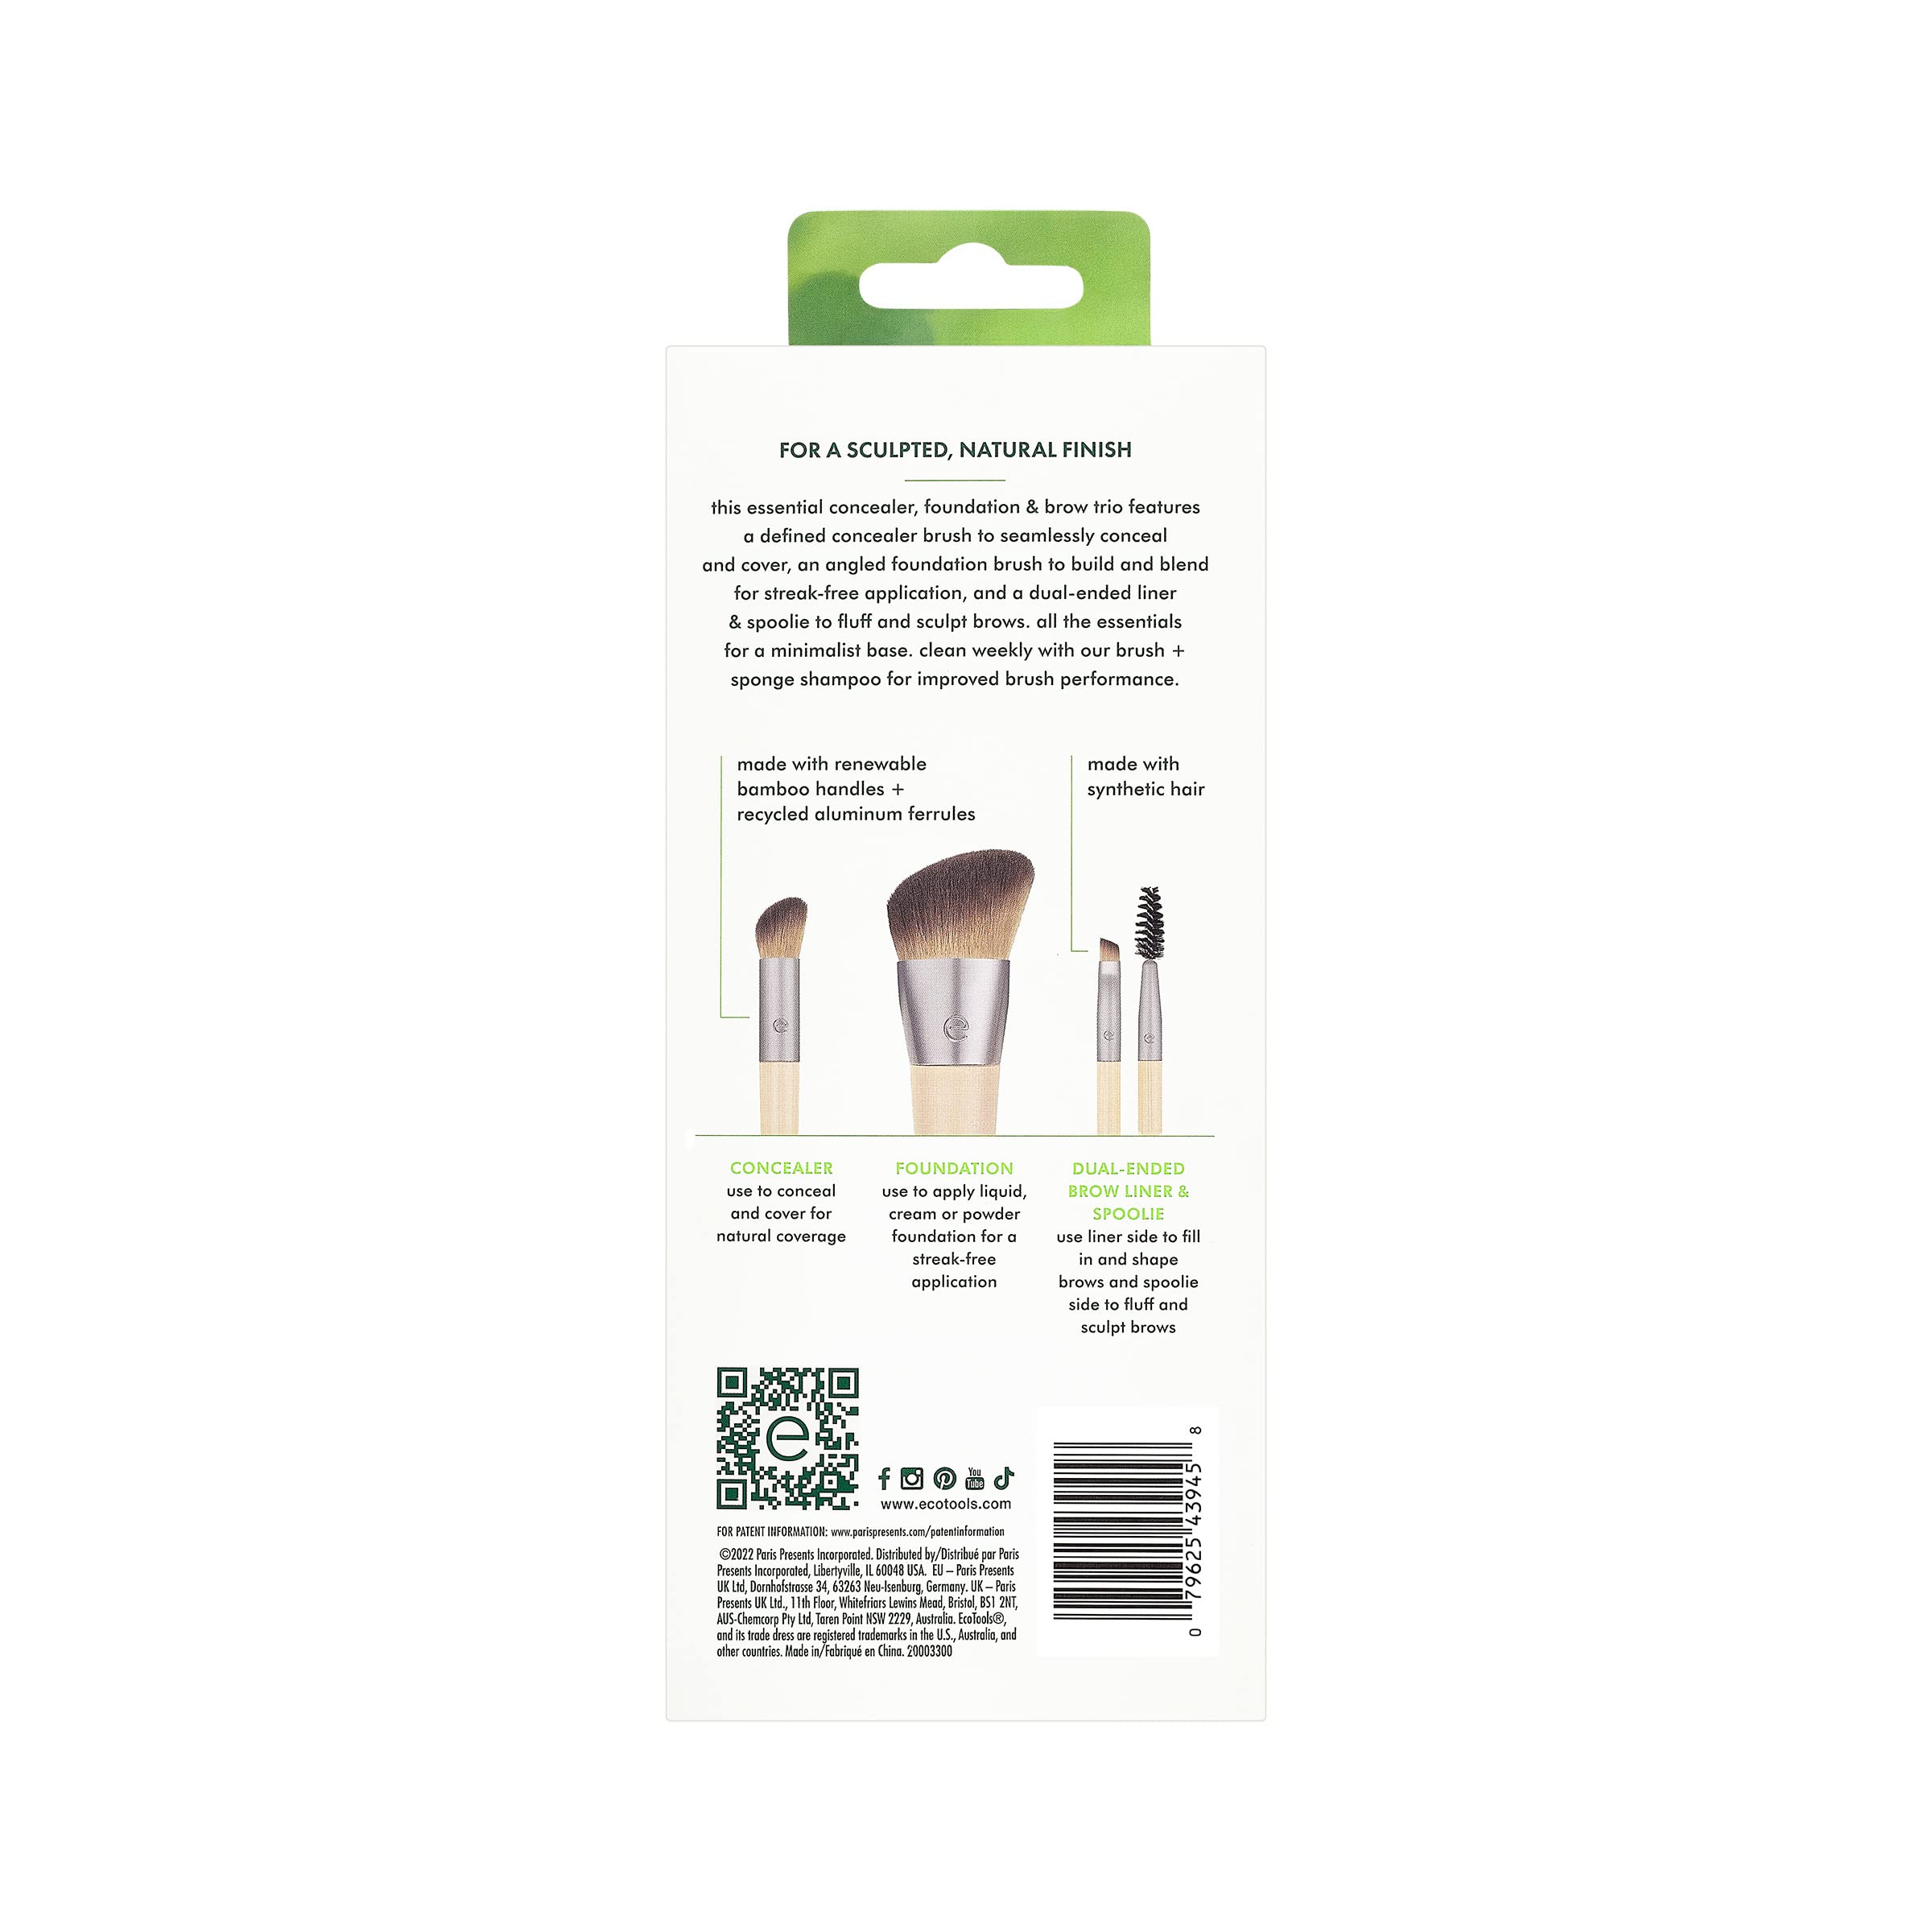 EcoTools New Natural Conceal, Enhance, & Sculpt Trio, Makeup Brushes For Foundation, Concealer, & Brows, Dense, Synthetic Bristles For Sculpting Face, Vegan & Cruelty-Free, 3 Piece Set